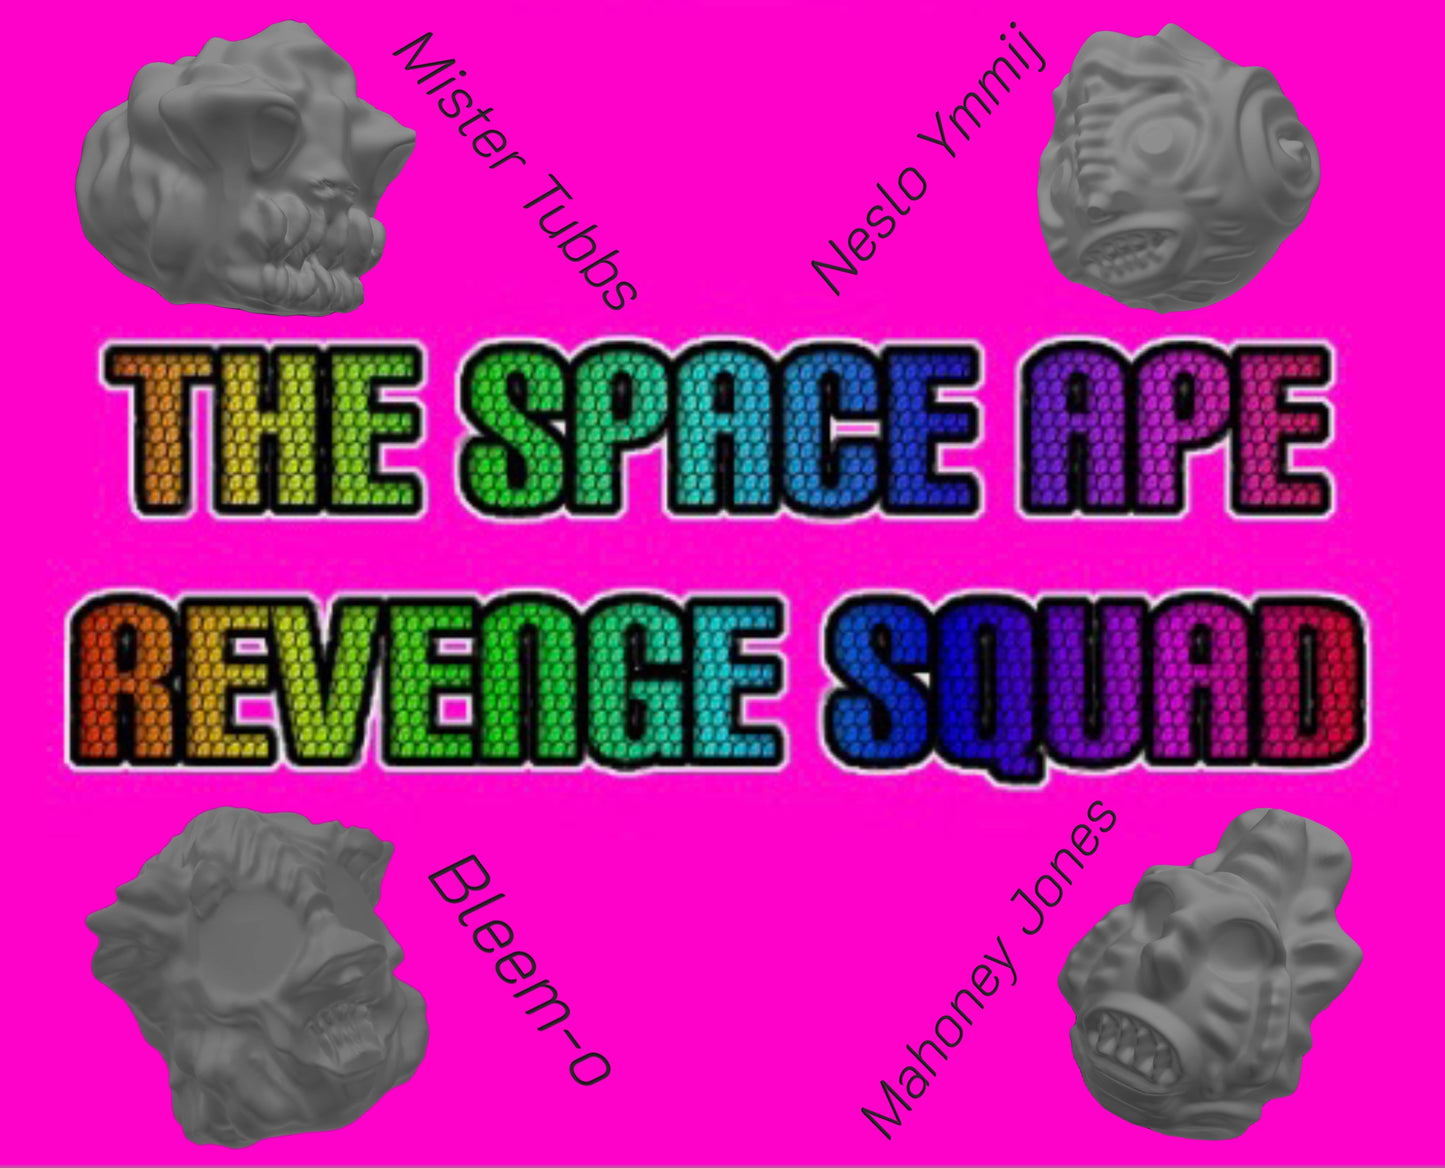 The Space Ape Revenge Squad: Cake Eaters of the Universe